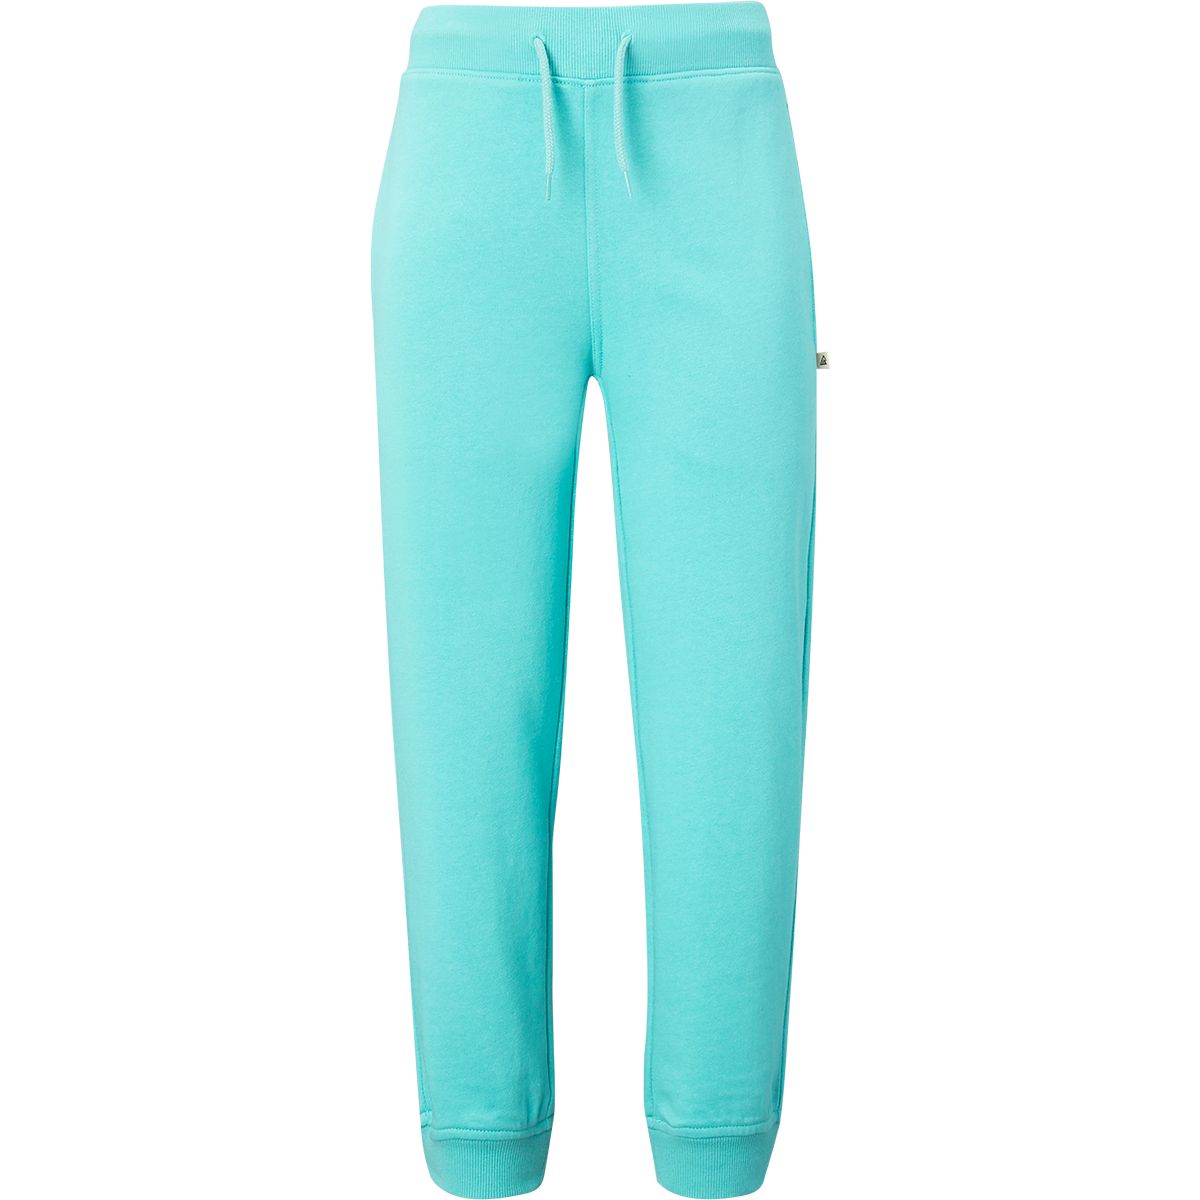 Ripzone Girls' Veil French Terry Sweat Pants